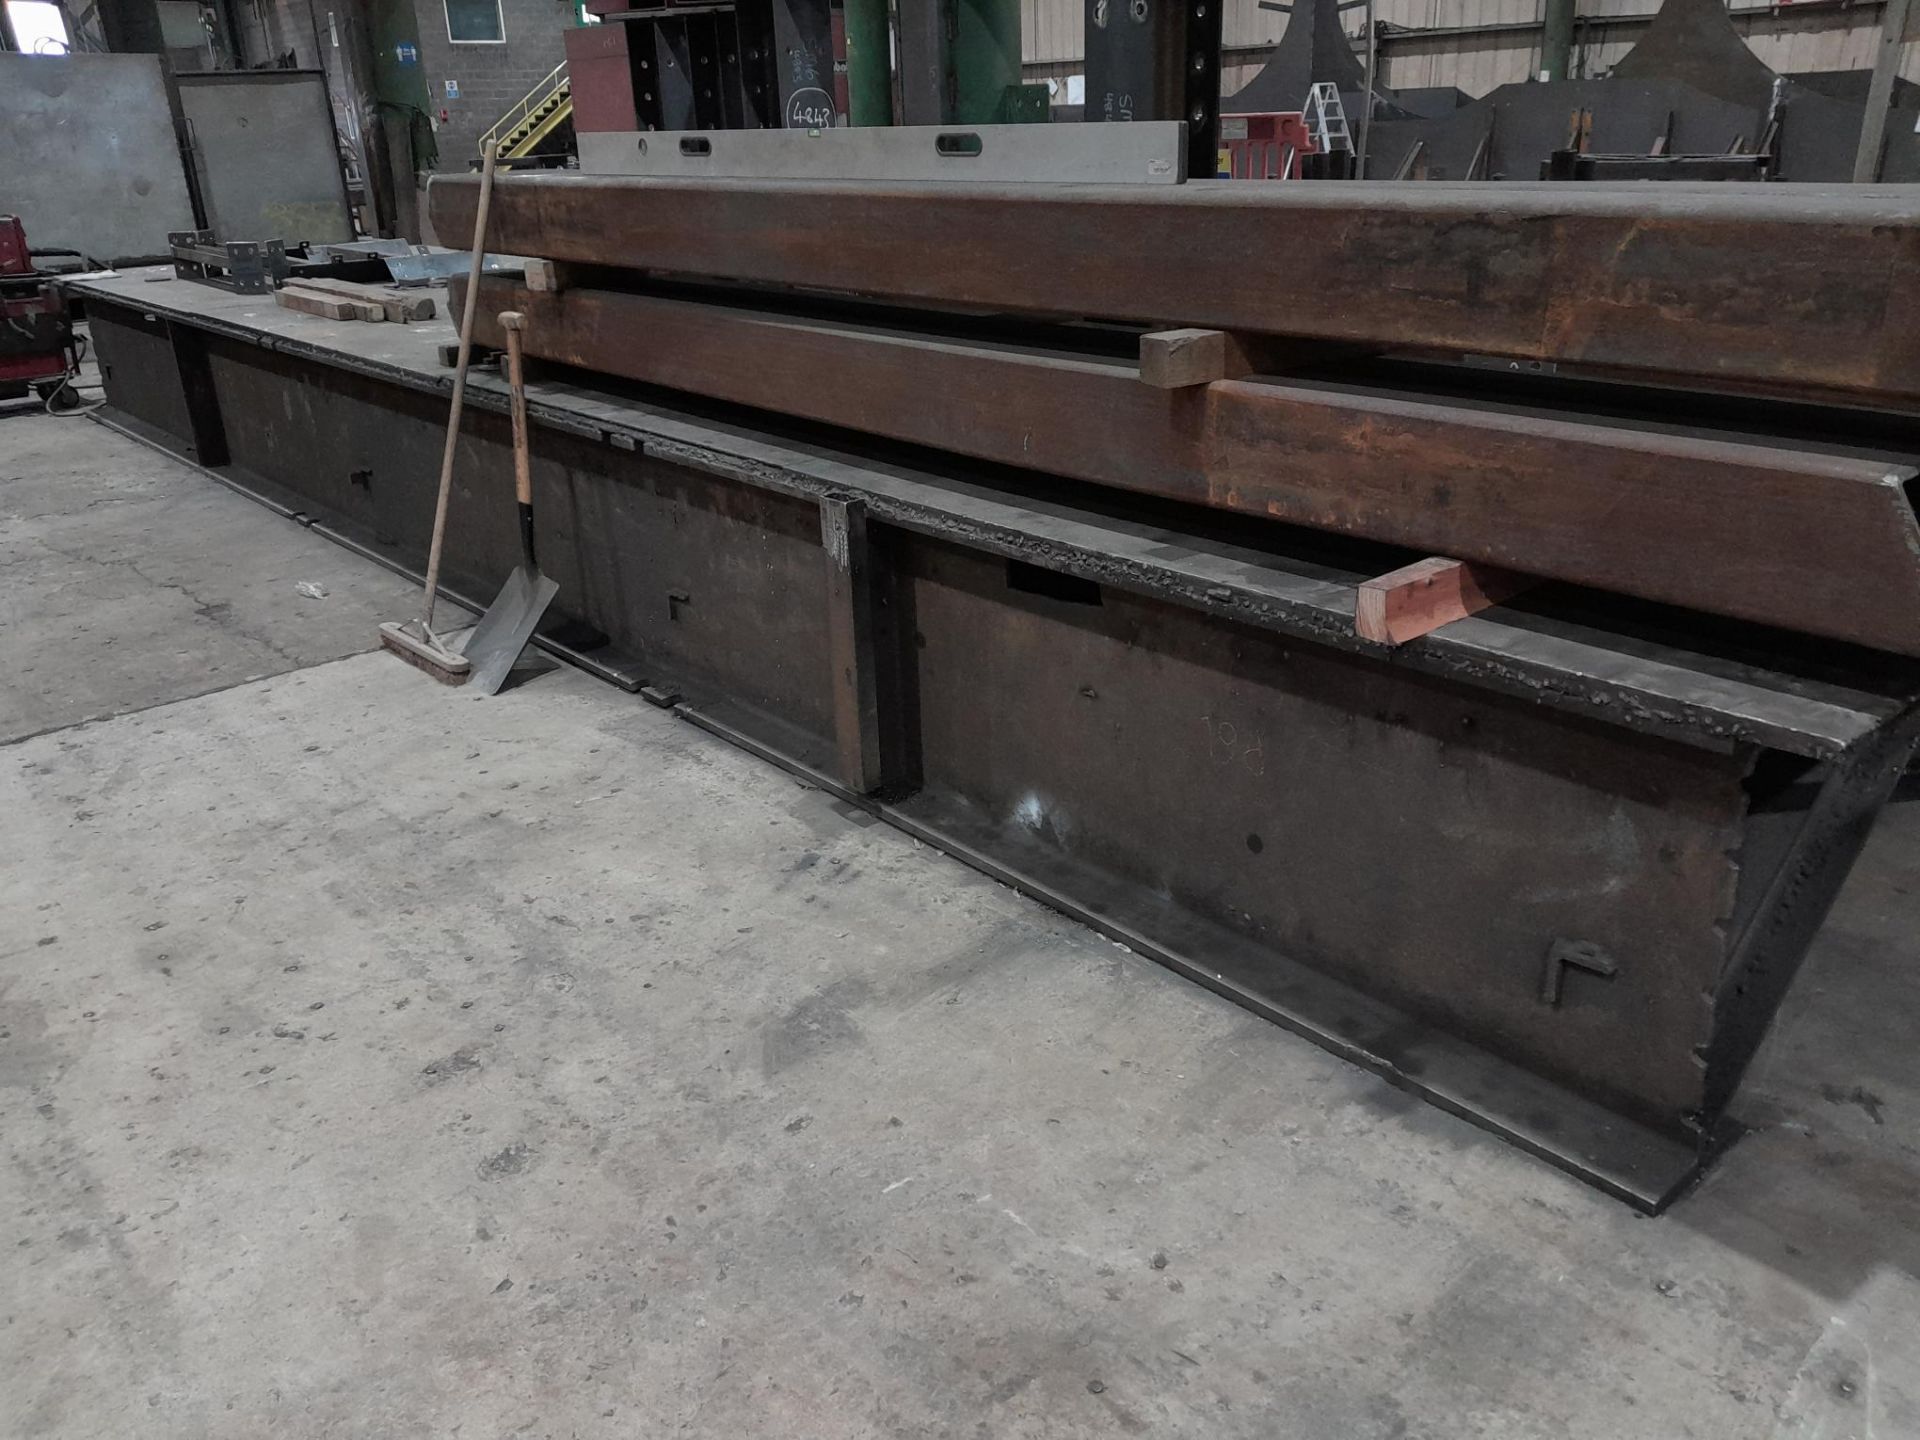 Very large fabricated work bench, approx 7m. Contents not included. - Bild 2 aus 3